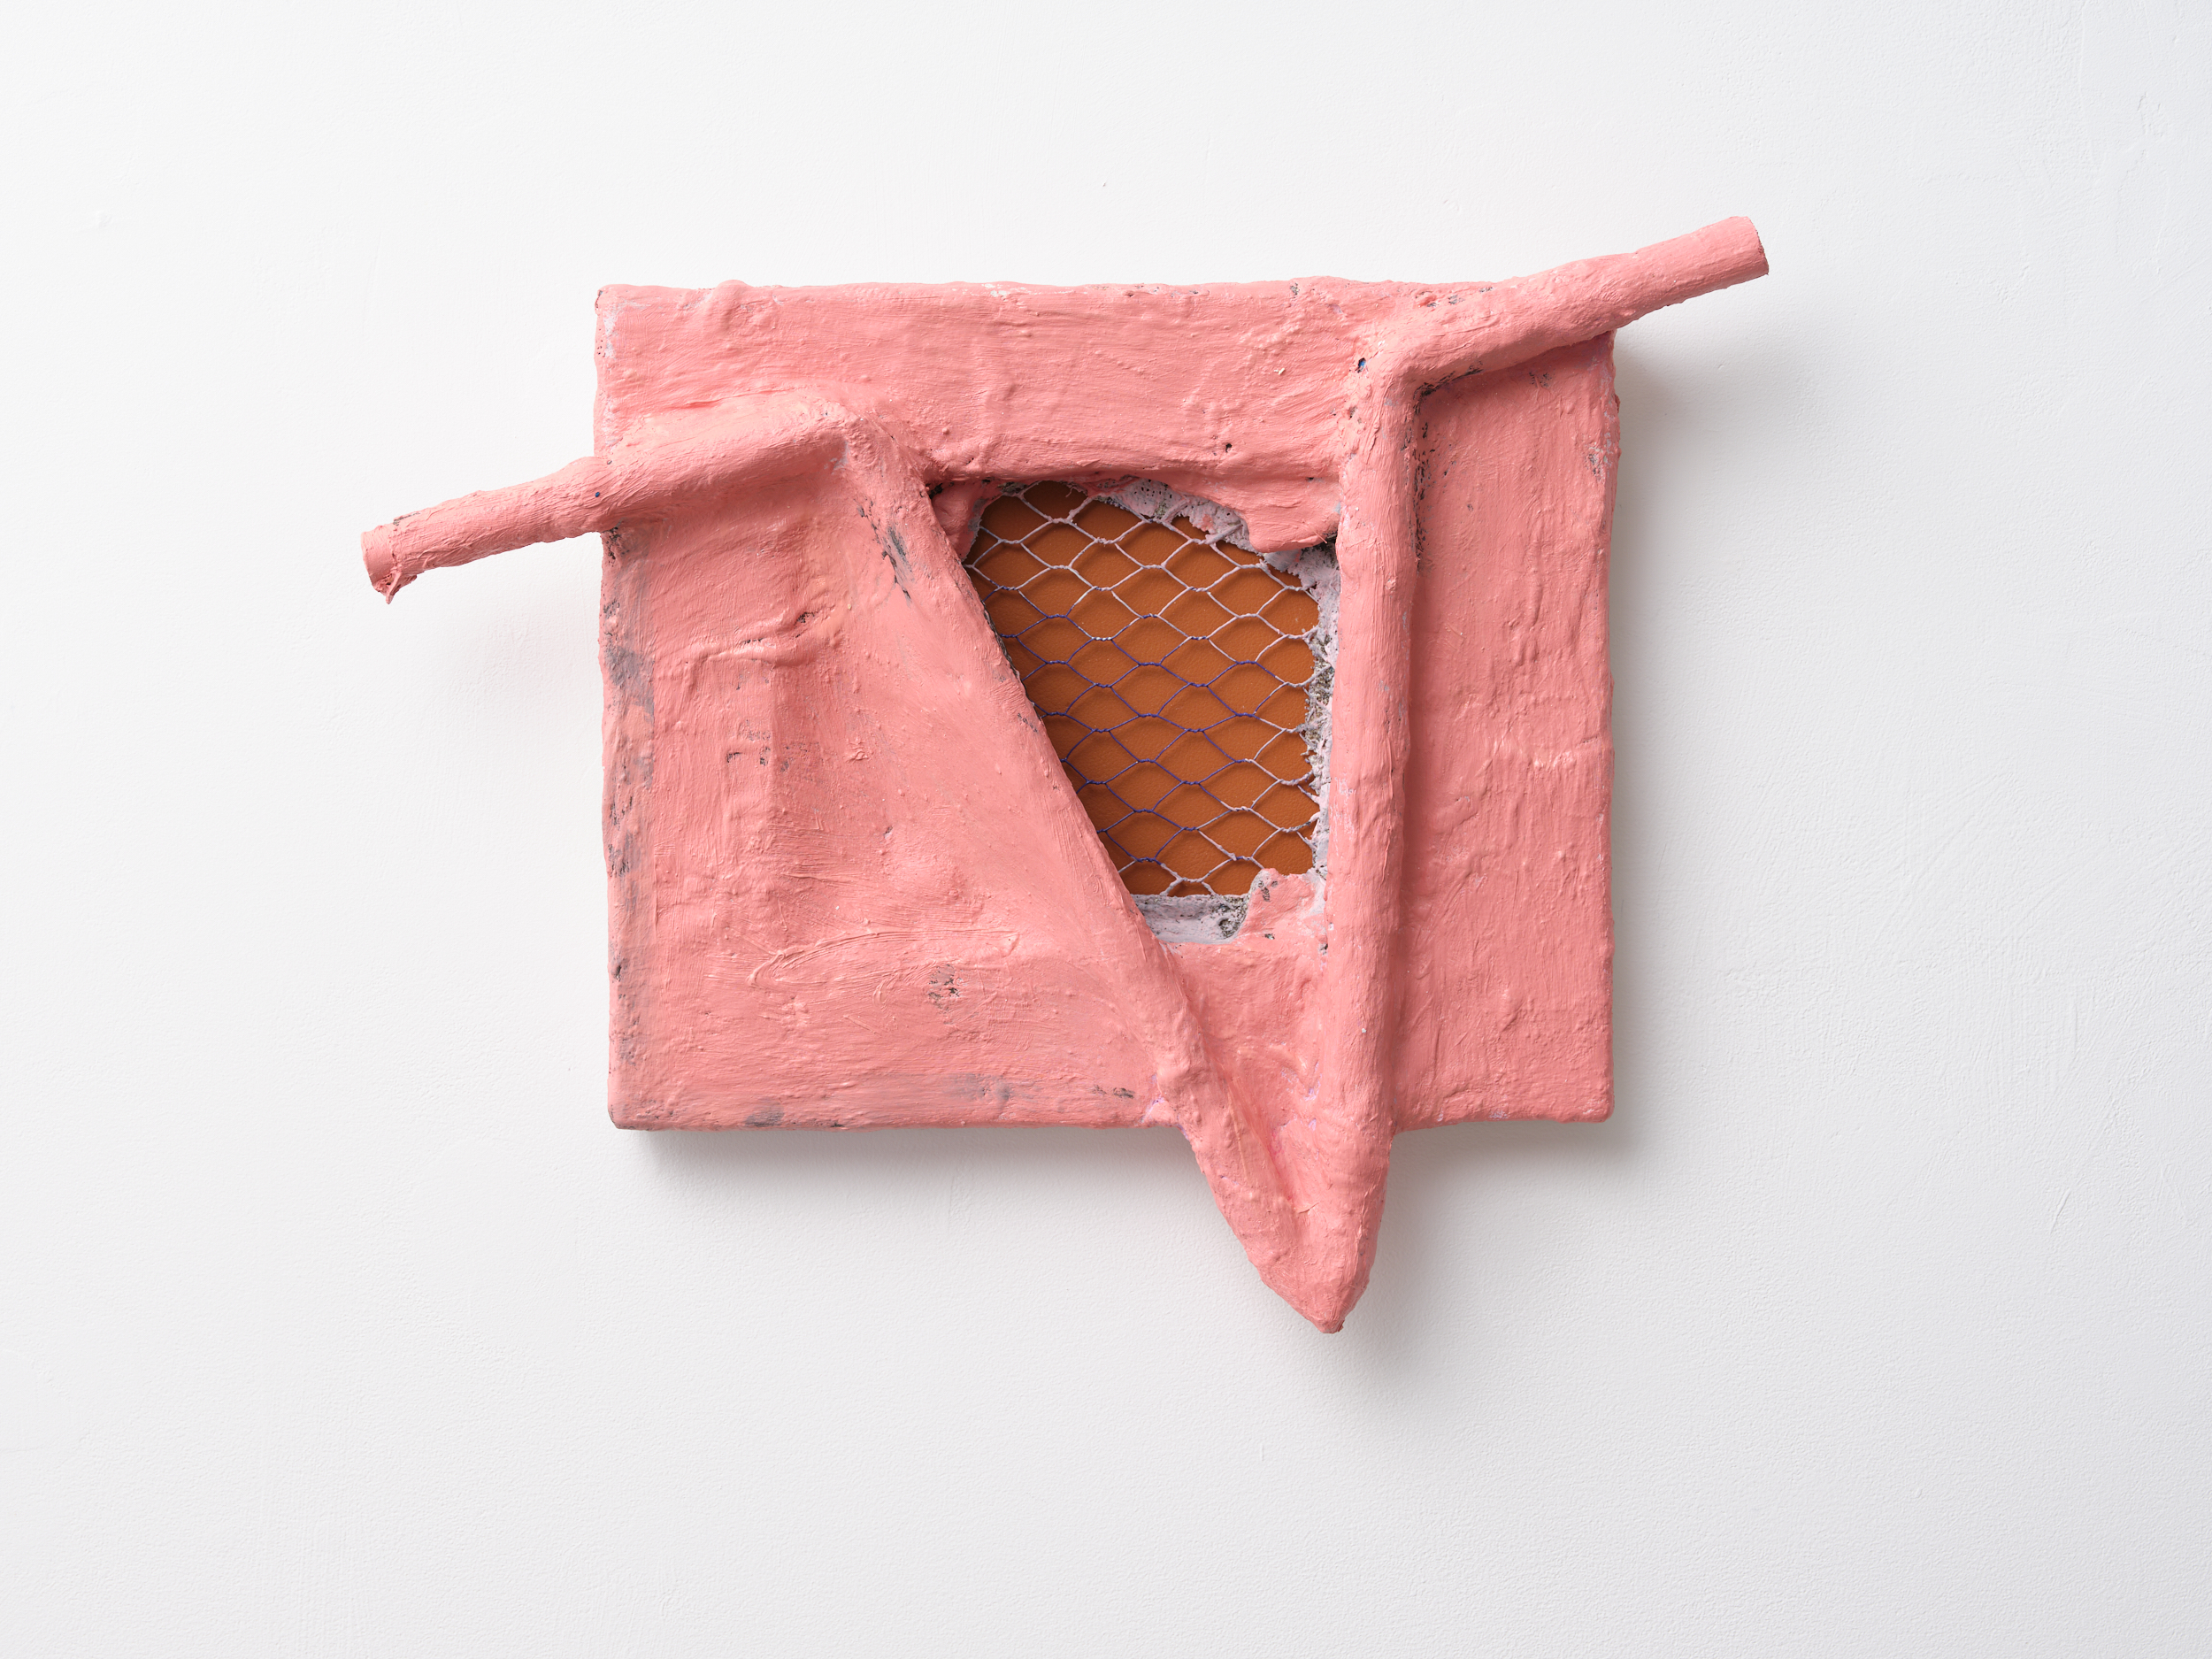 Sculptural painting by Rachel Walters in Plaster bandage, plumbers pipe, chicken wire, leather and oil on stretcher titled Front